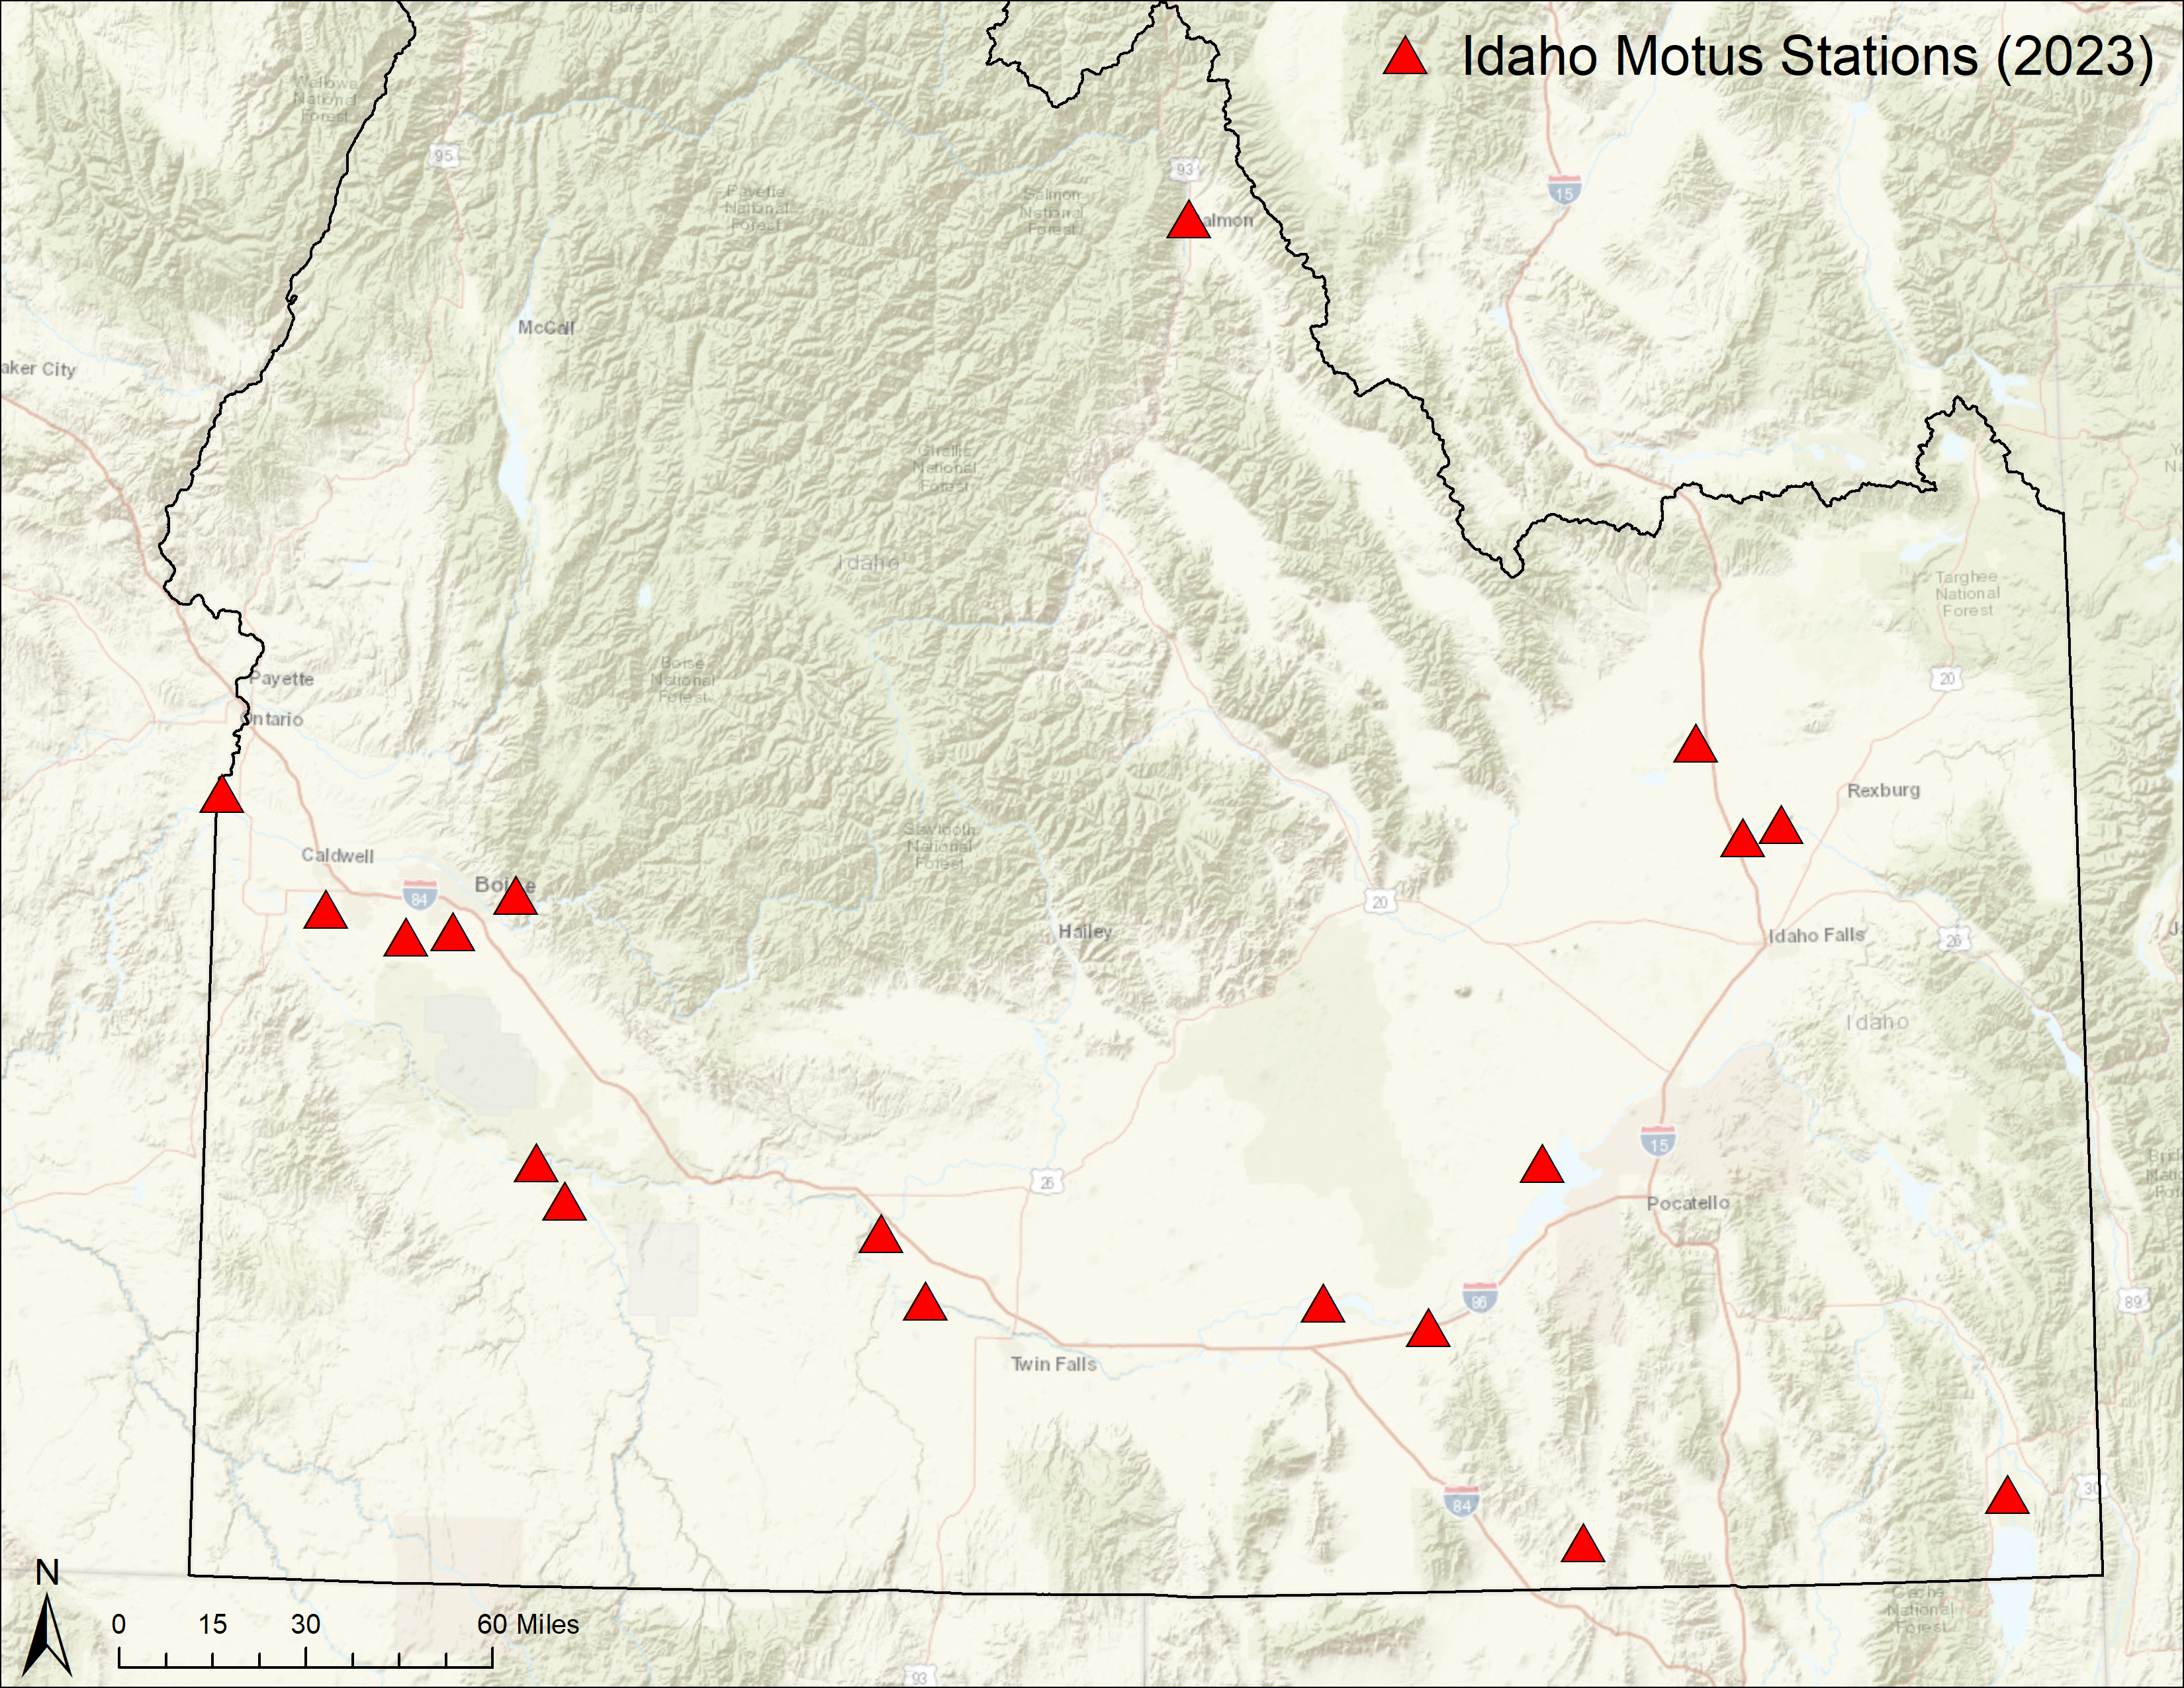 A map of south and central Idaho shows 18 red triangles marking the locations of Motus stations throughout the state. Most are concentrated along the Snake River Plain across the southern portion of the state. One is located near Salmon, Idaho and two more are in the far southeastern corner near the border with Utah.